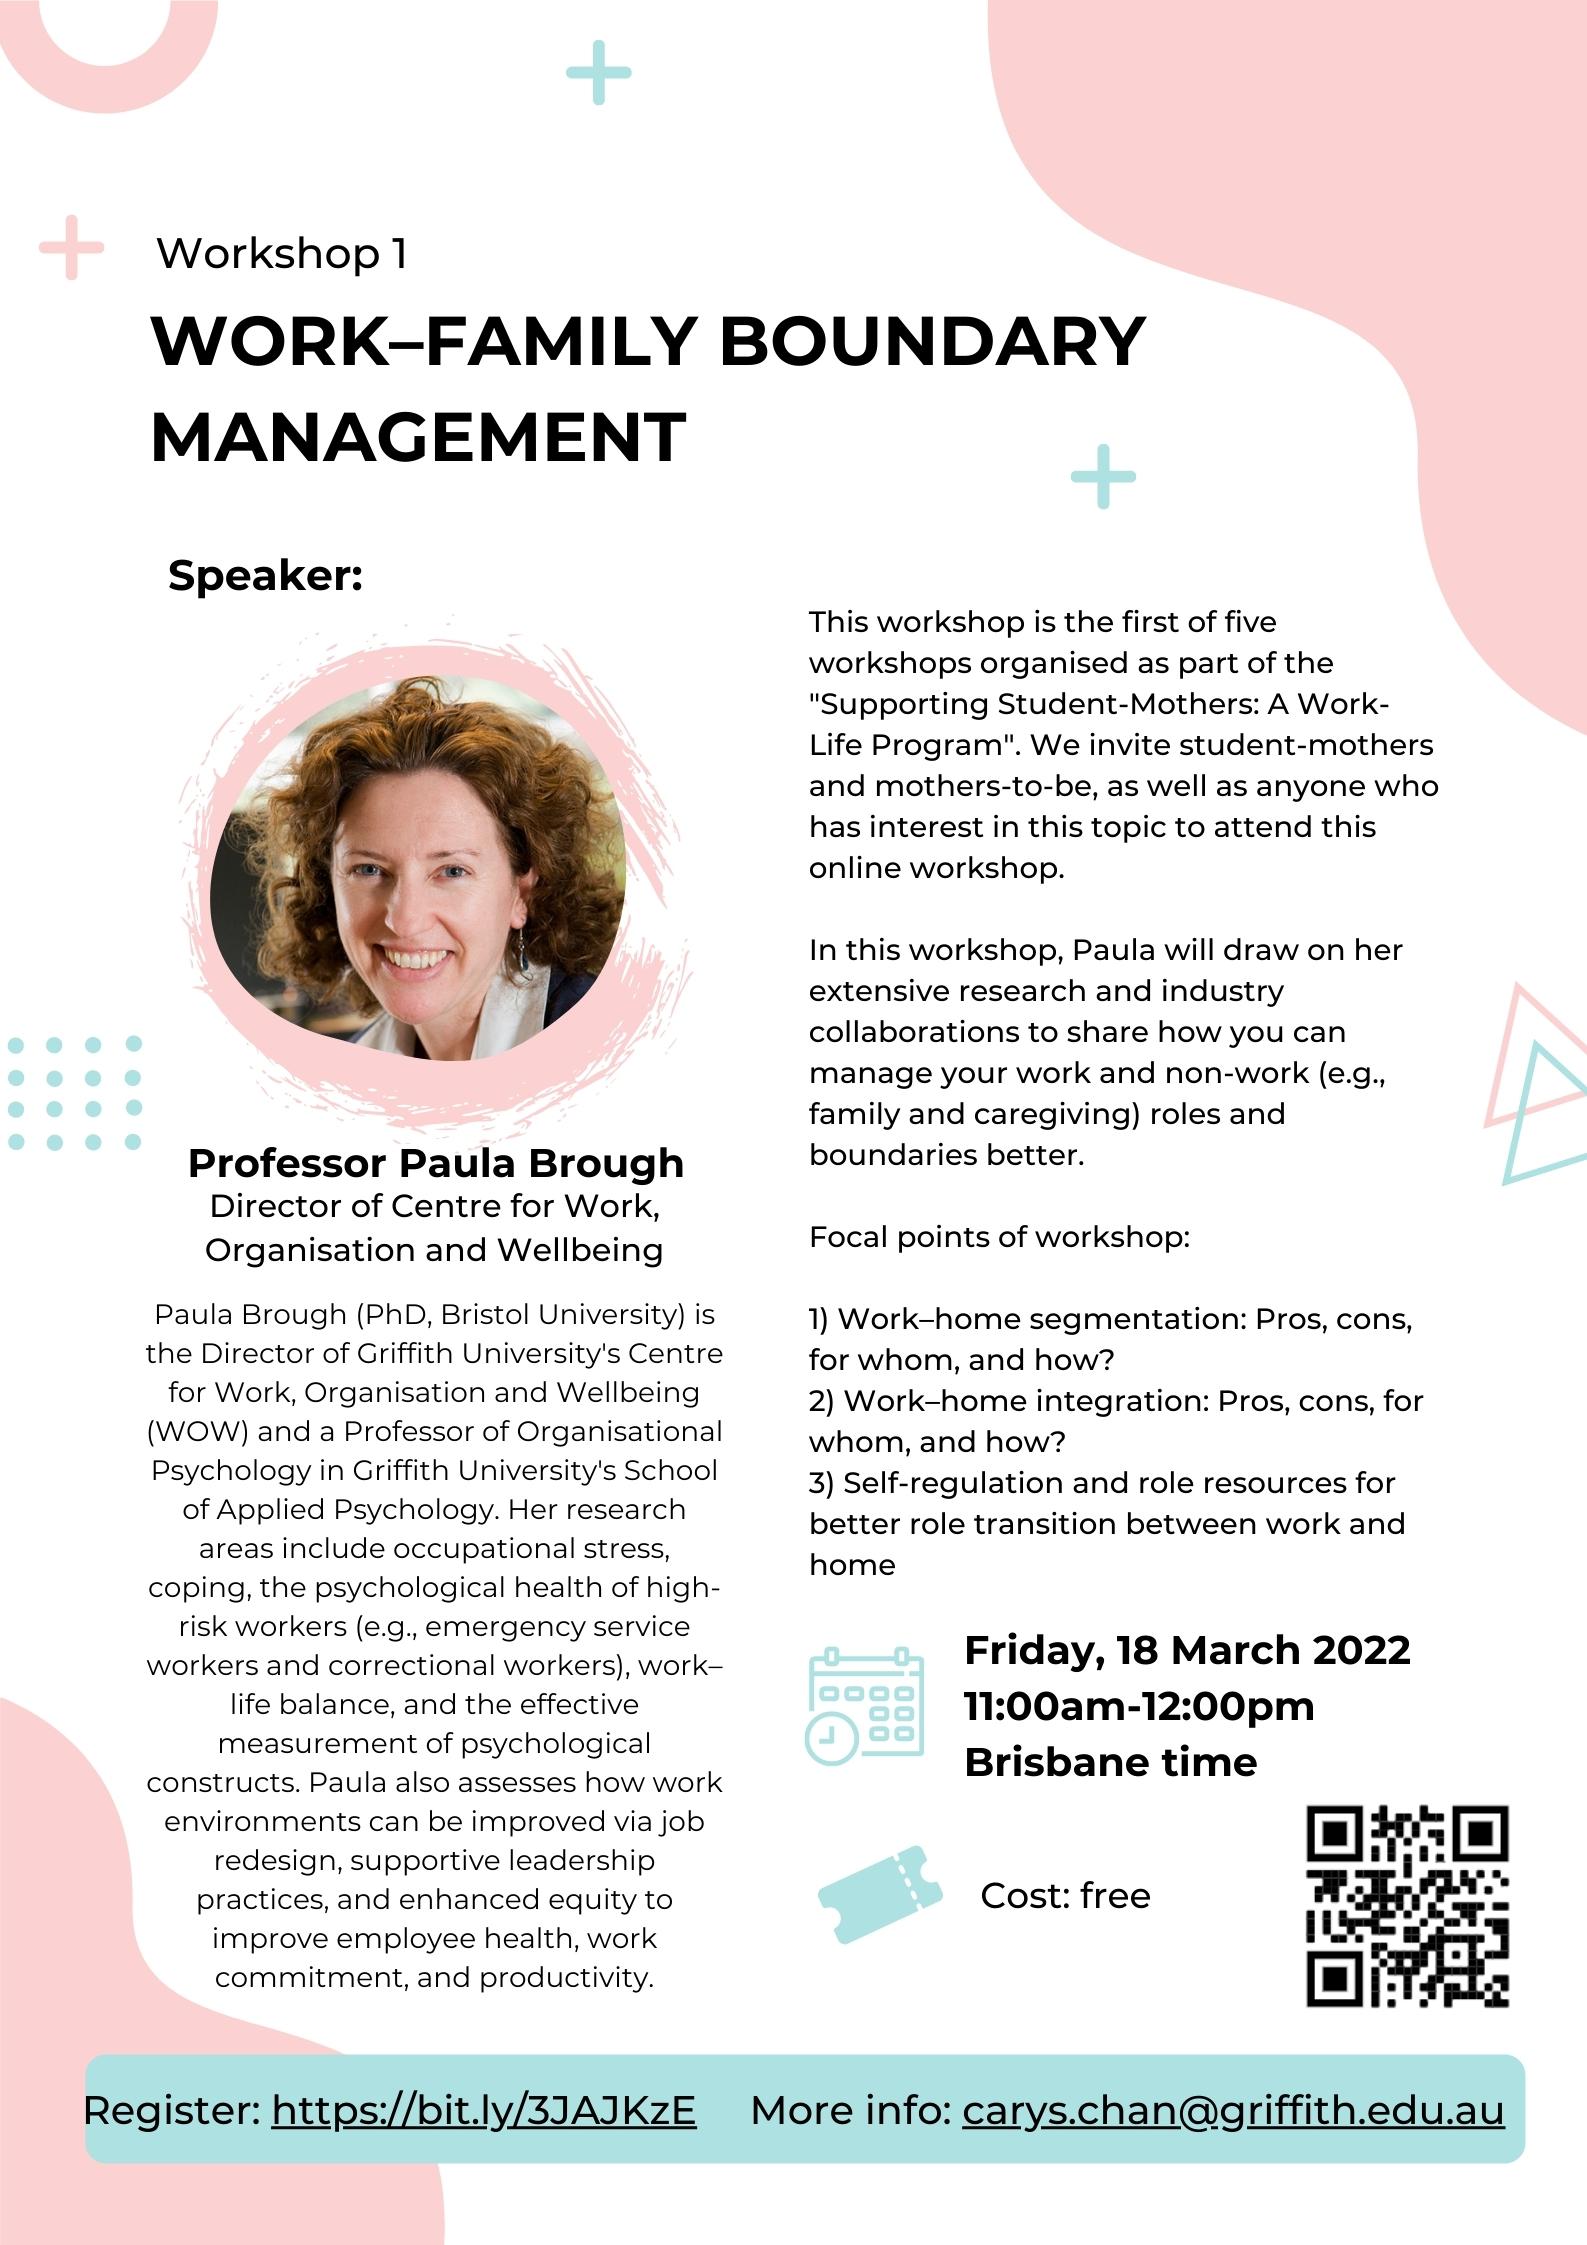 Supporting Student-Mothers - Workshop 1: Work-Family Boundary Management